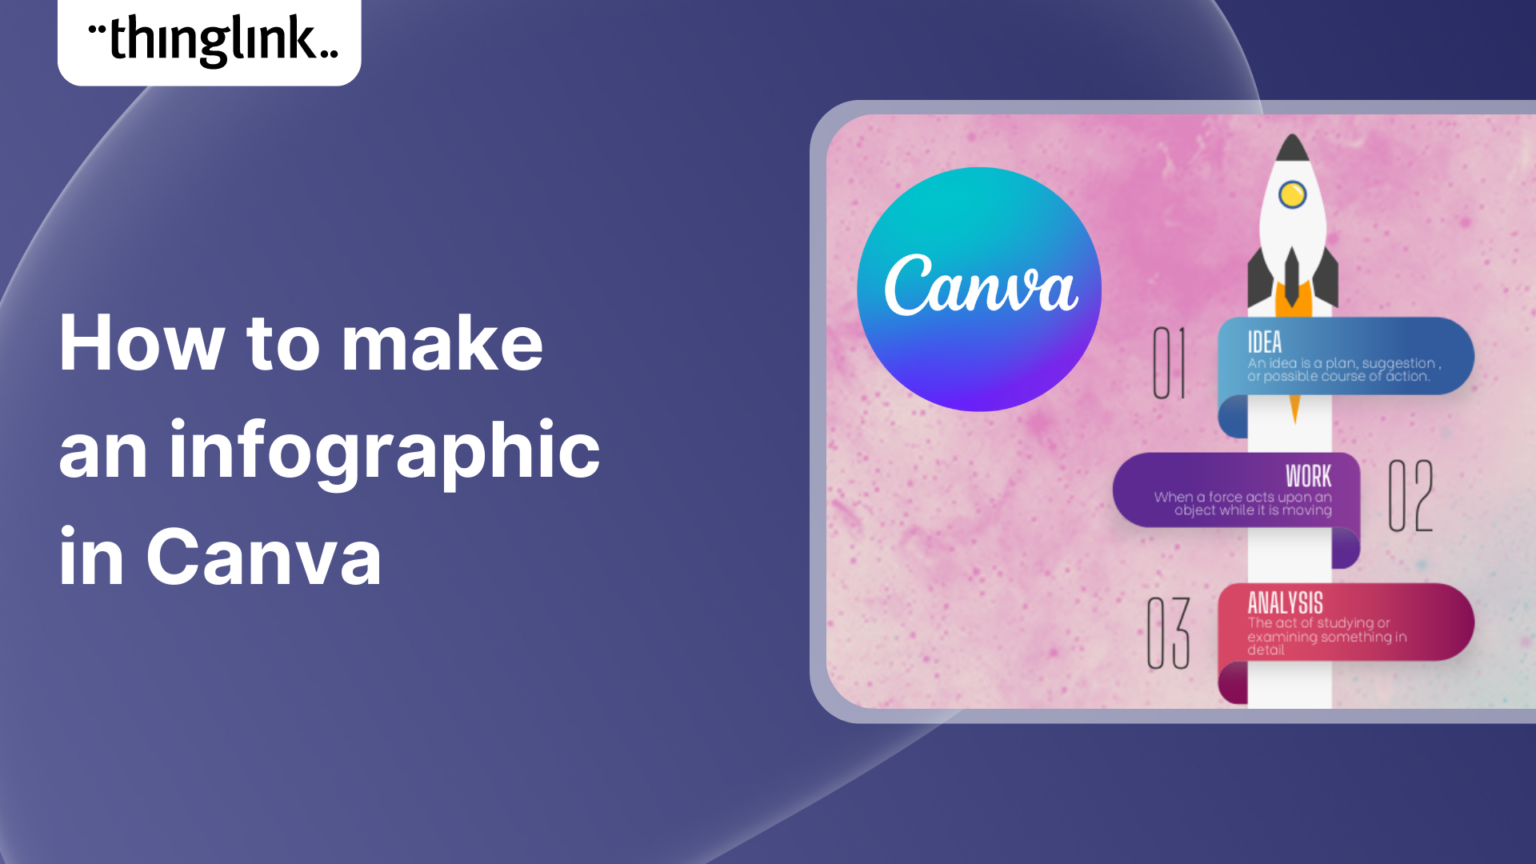 How to make an infographic in Canva